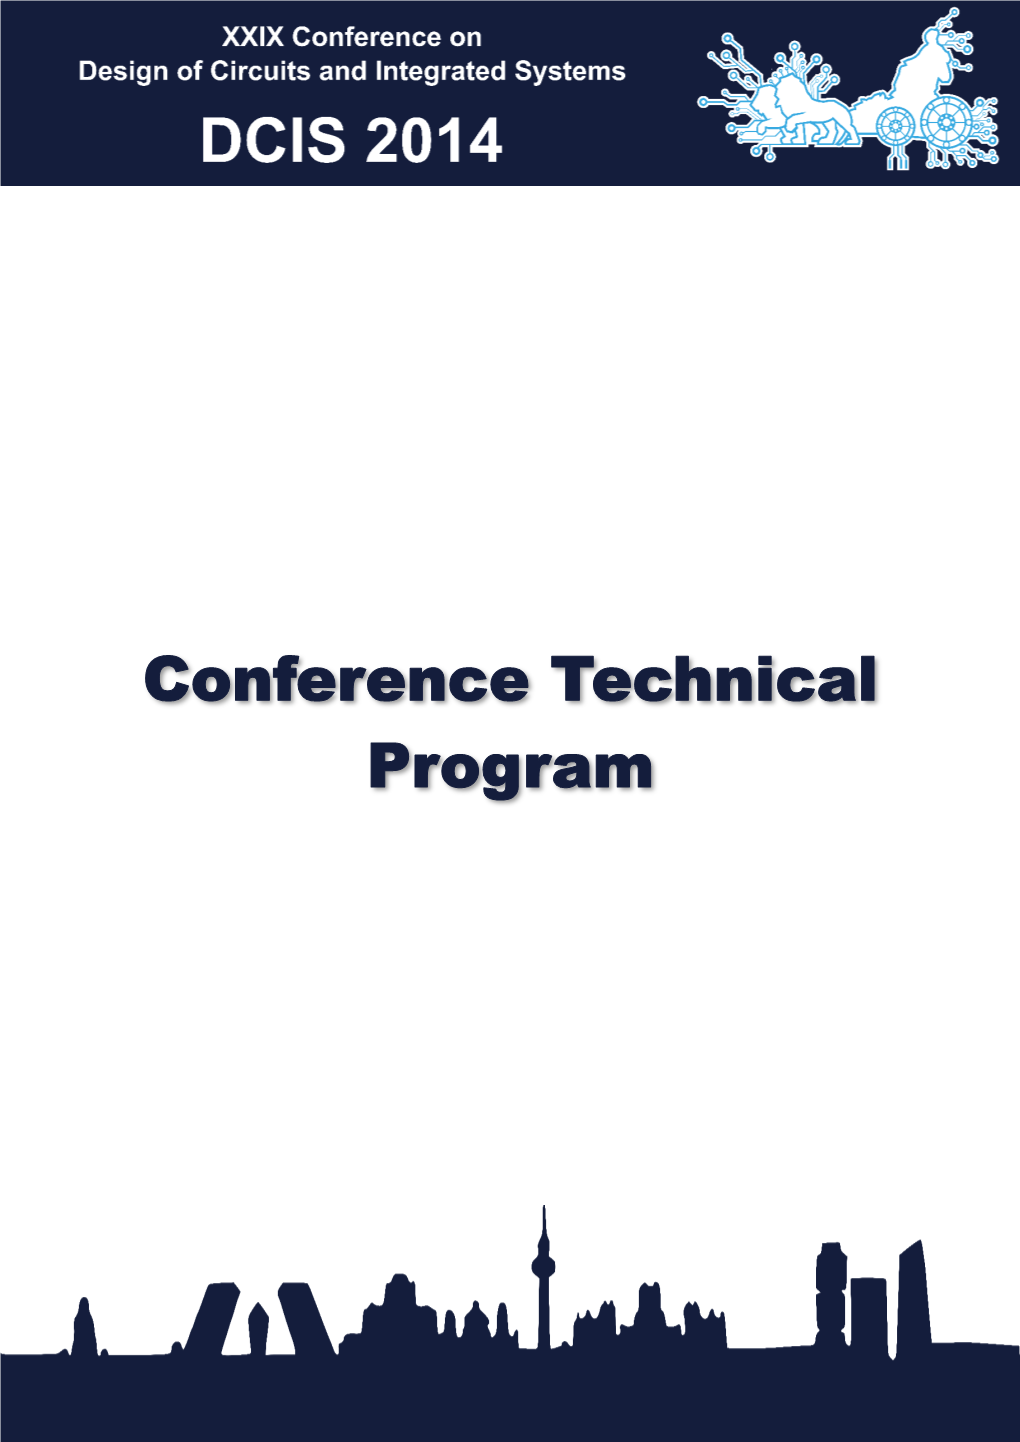 Conference Technical Program XXIX Conference on Design of Circuits and Integrated Systems Madrid, Spain, November 26Th – 28Th